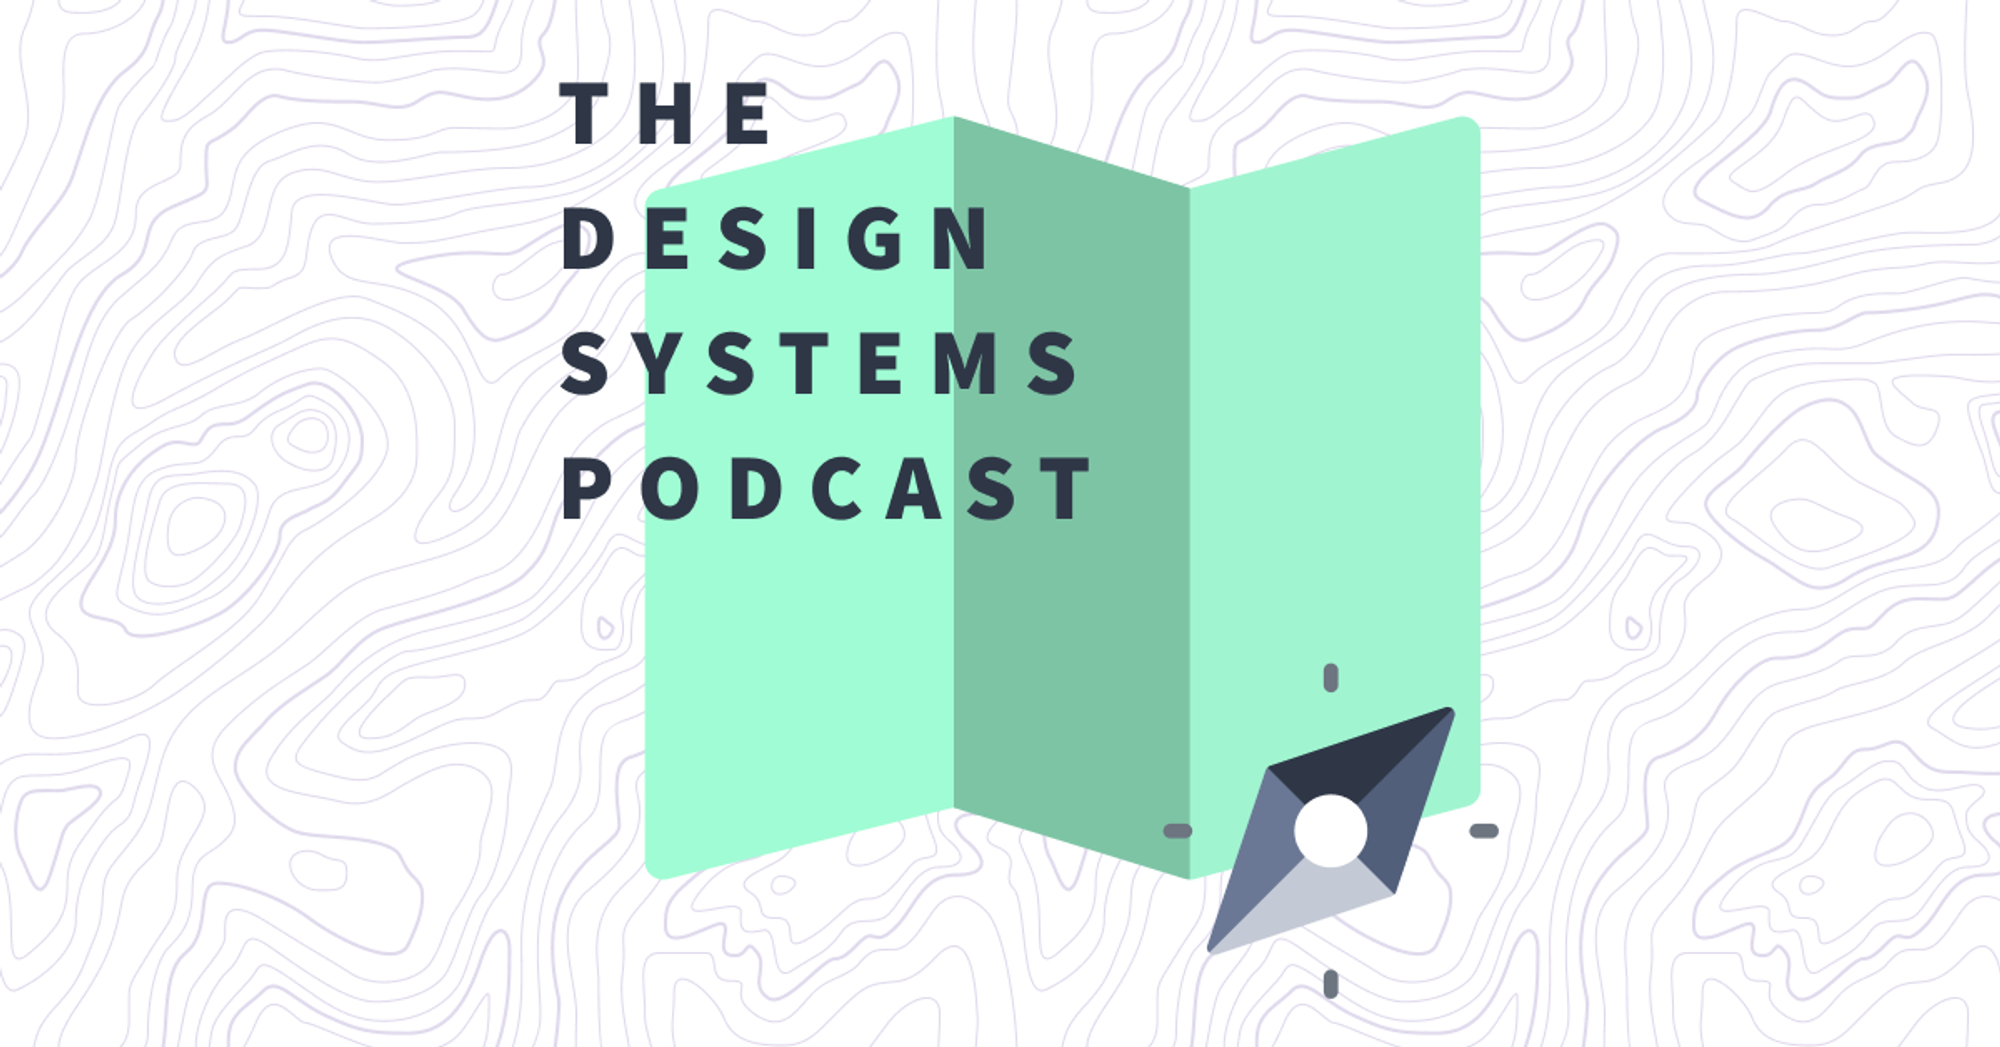 Episodes | Design Systems Podcast